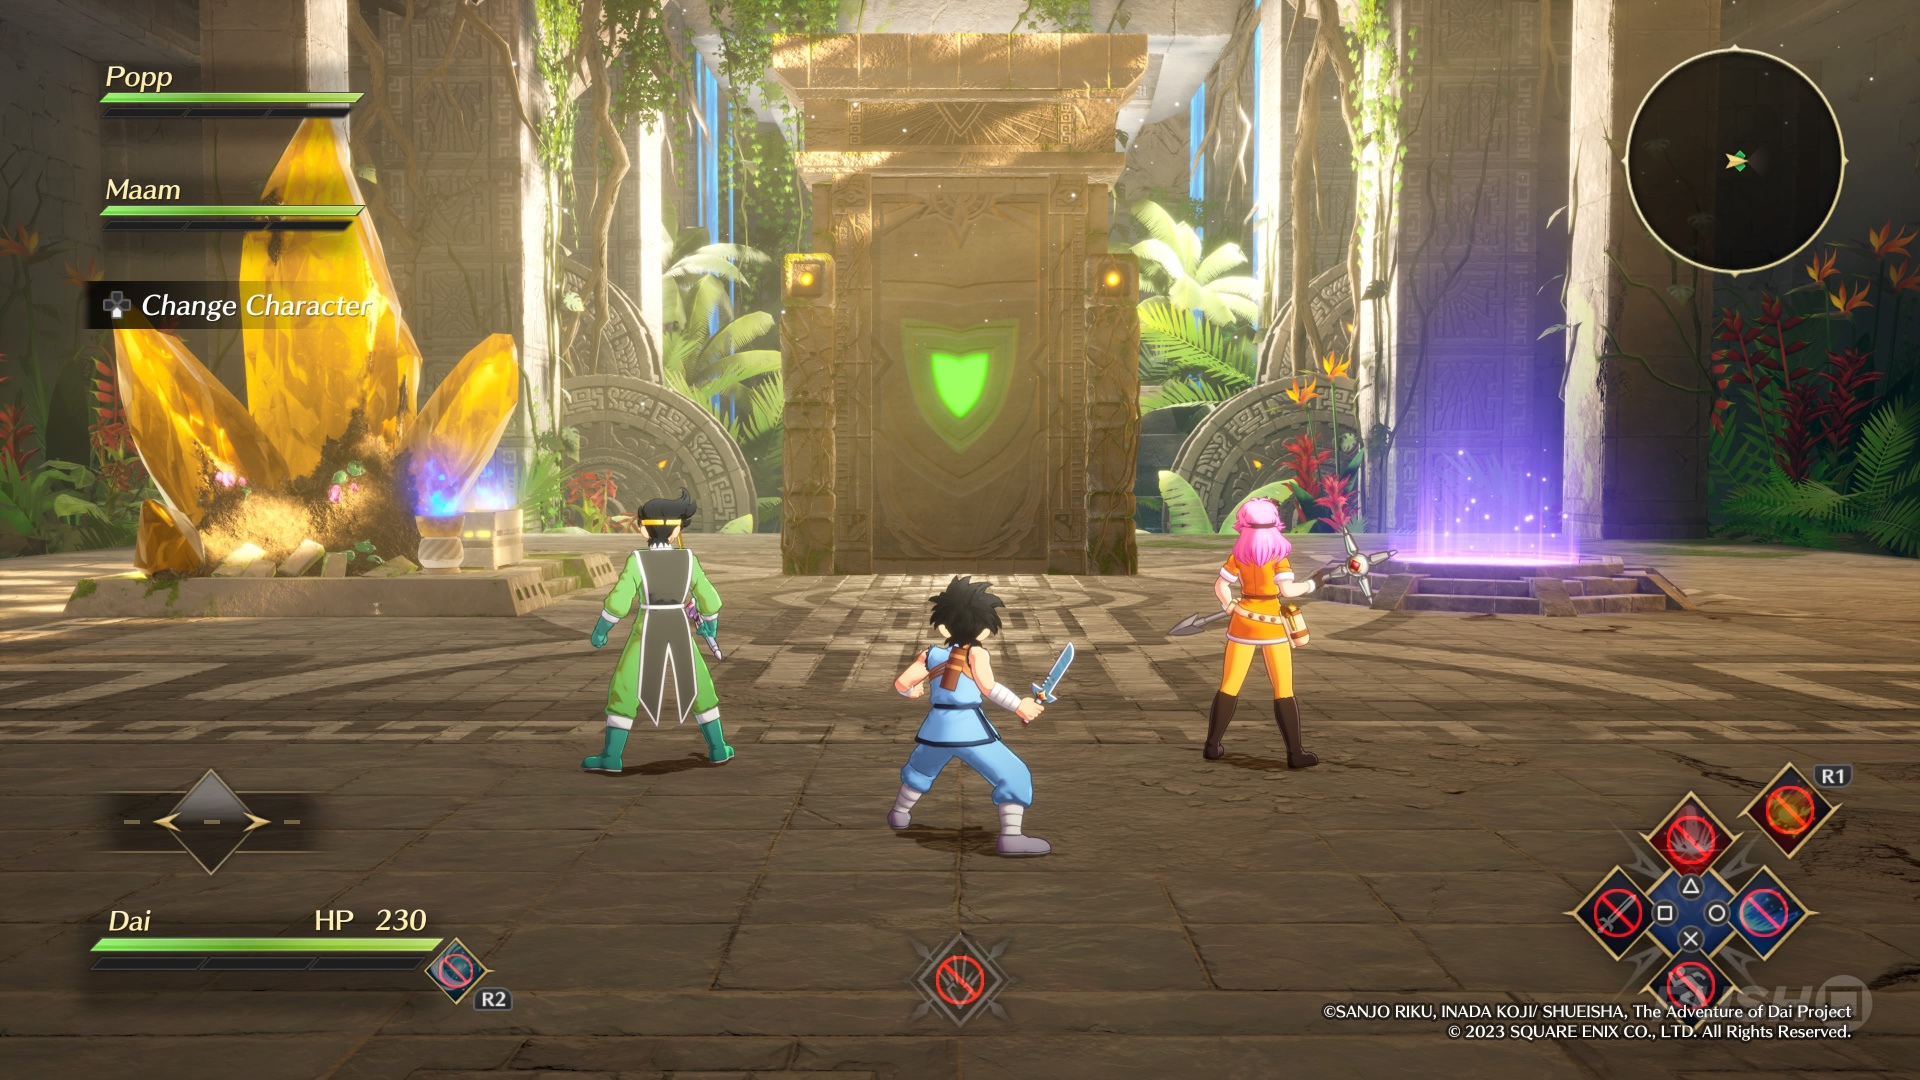 Review - Infinity Strash: Dragon Quest The Adventure of Dai - Gamerview